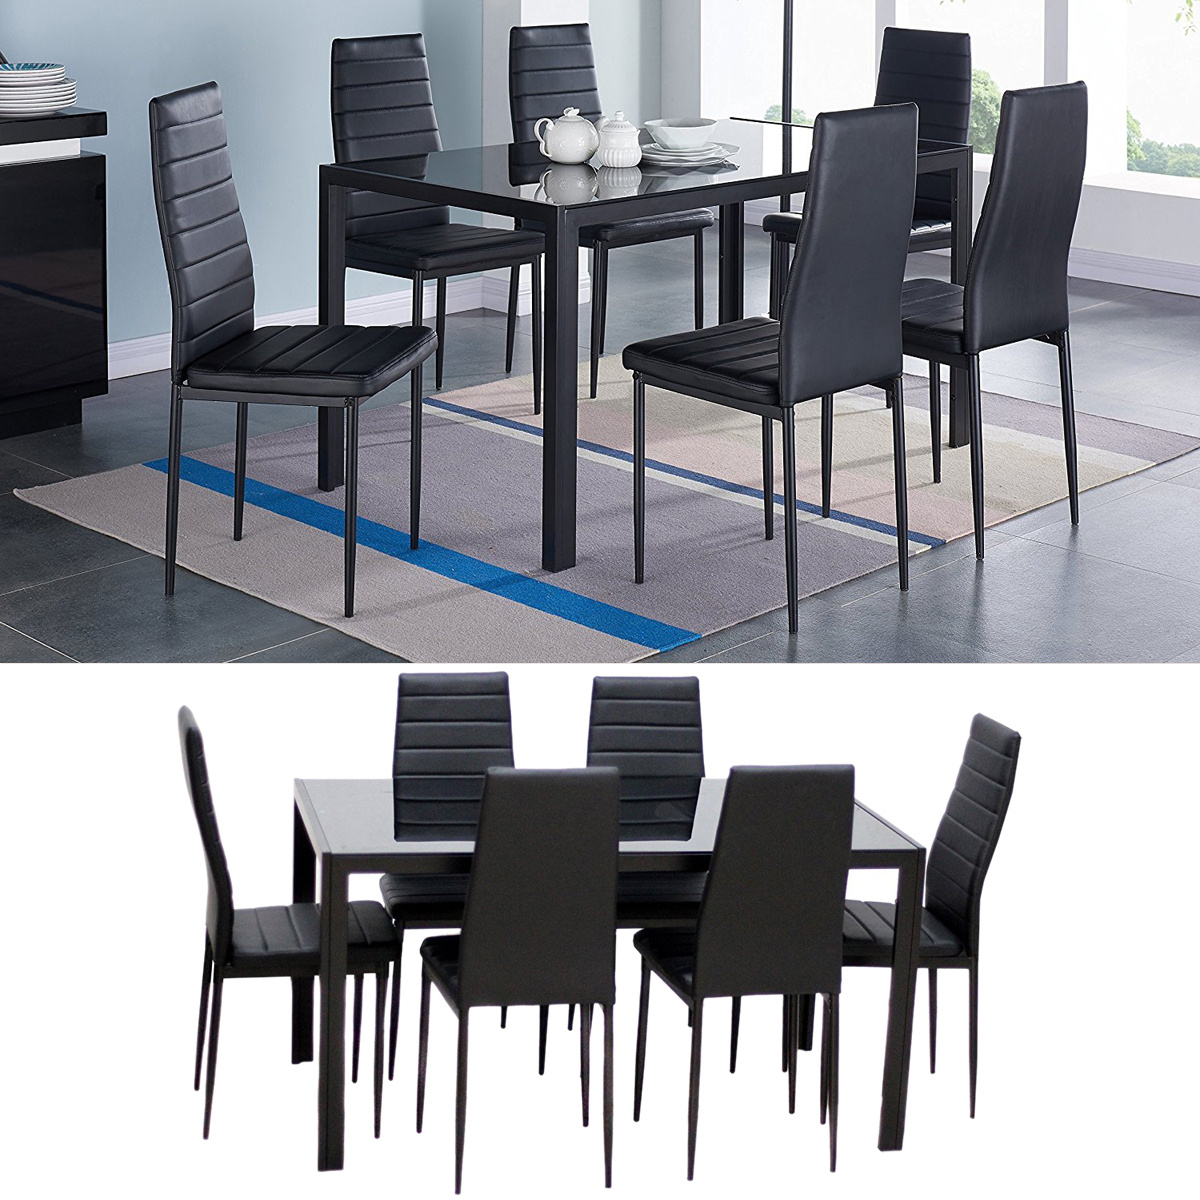 Details About 7 Pieces Black Glass Dining Table And 6 Chairs Faux Leather Kitchen Dinning Set in size 1200 X 1200